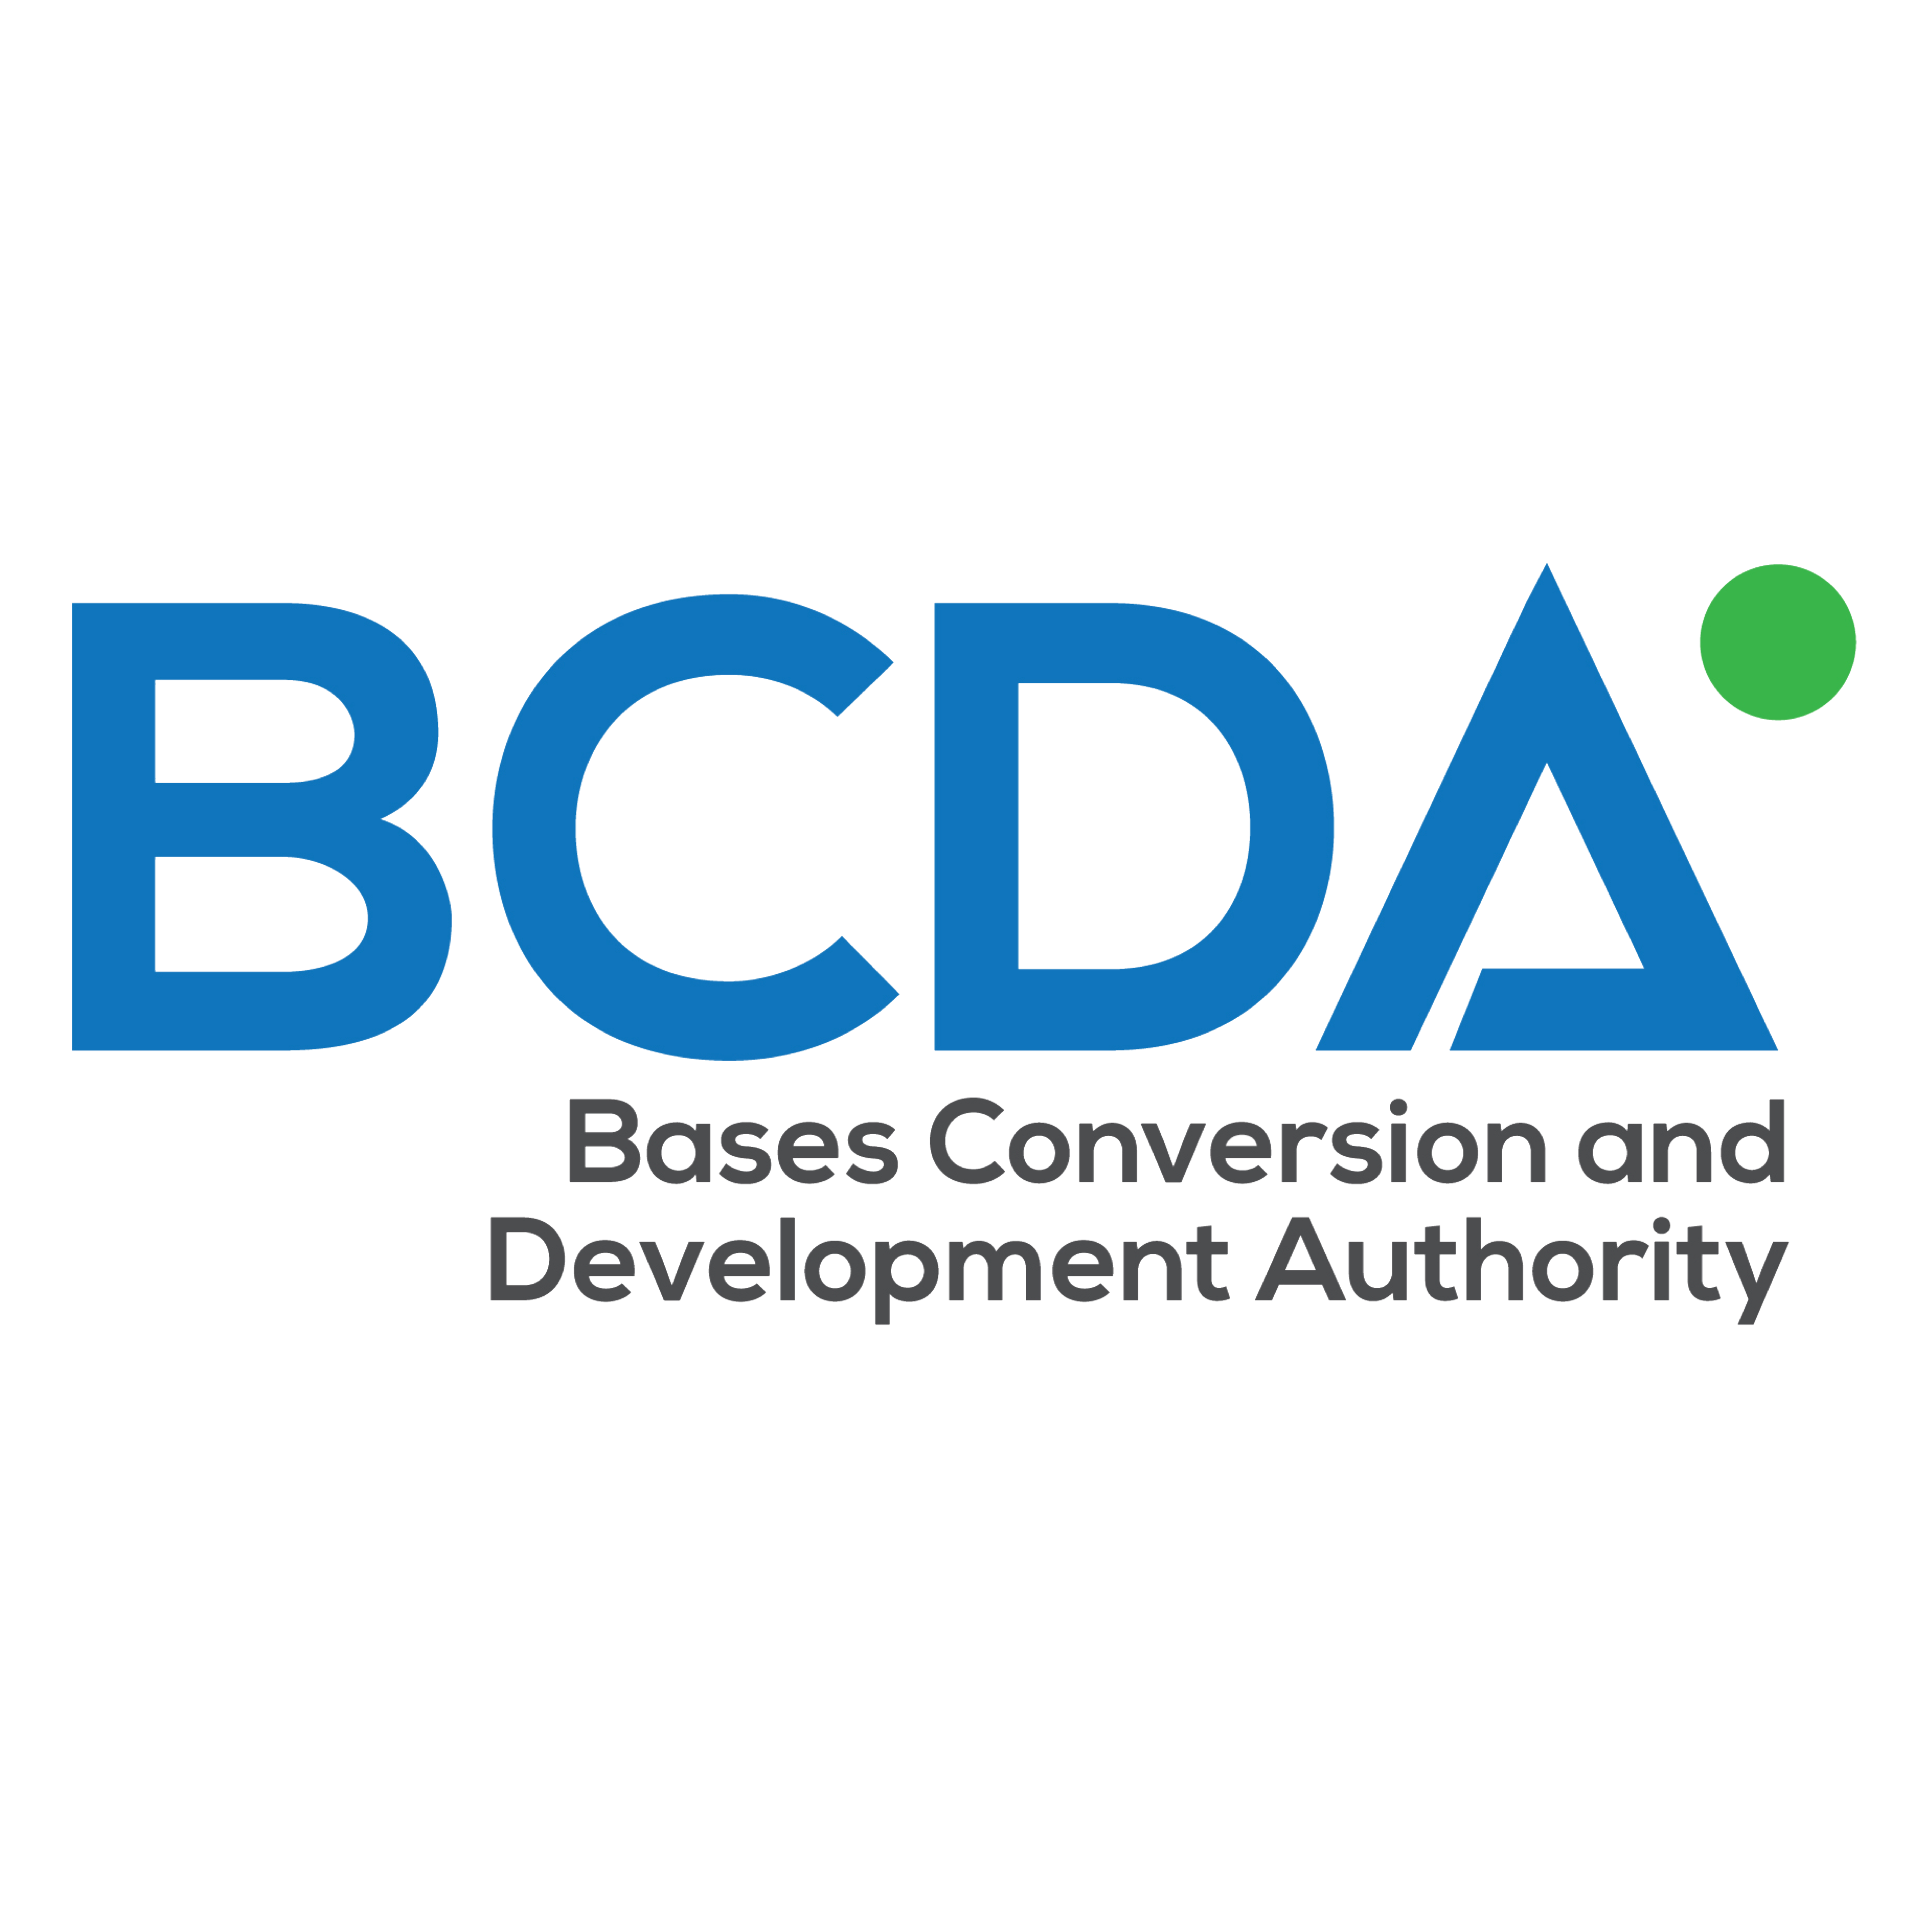 The BCDA Group transforms former military bases into premier centers of economic growth in partnership with the private sector. ( https://t.co/HSY23PMrPH )